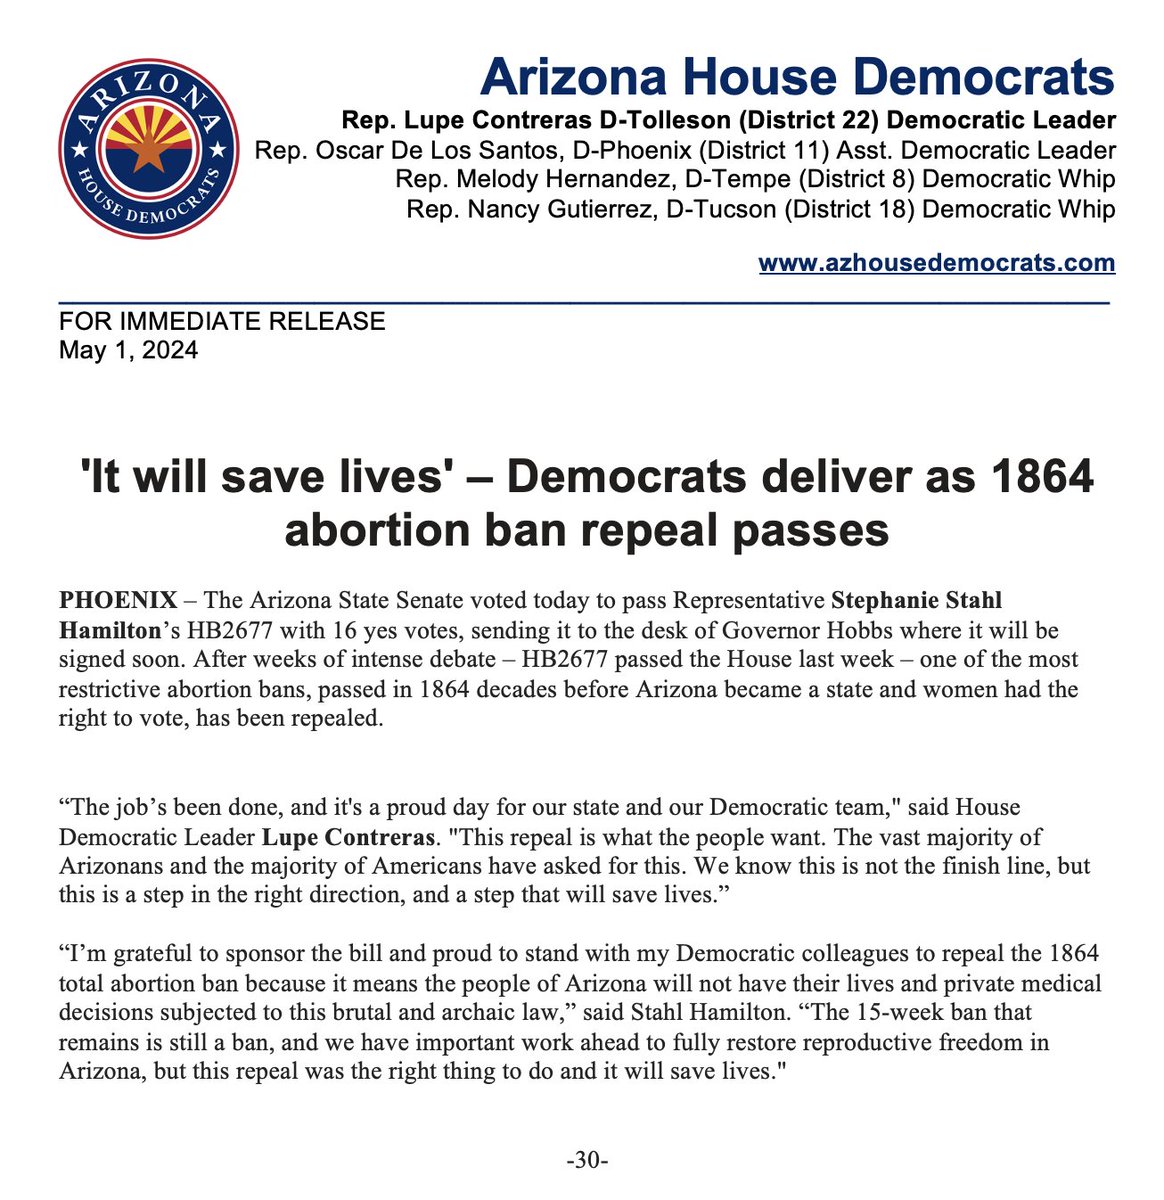 PRESS RELEASE: 'It will save lives' - Democrats deliver as 1864 abortion ban repeal passes #azleg